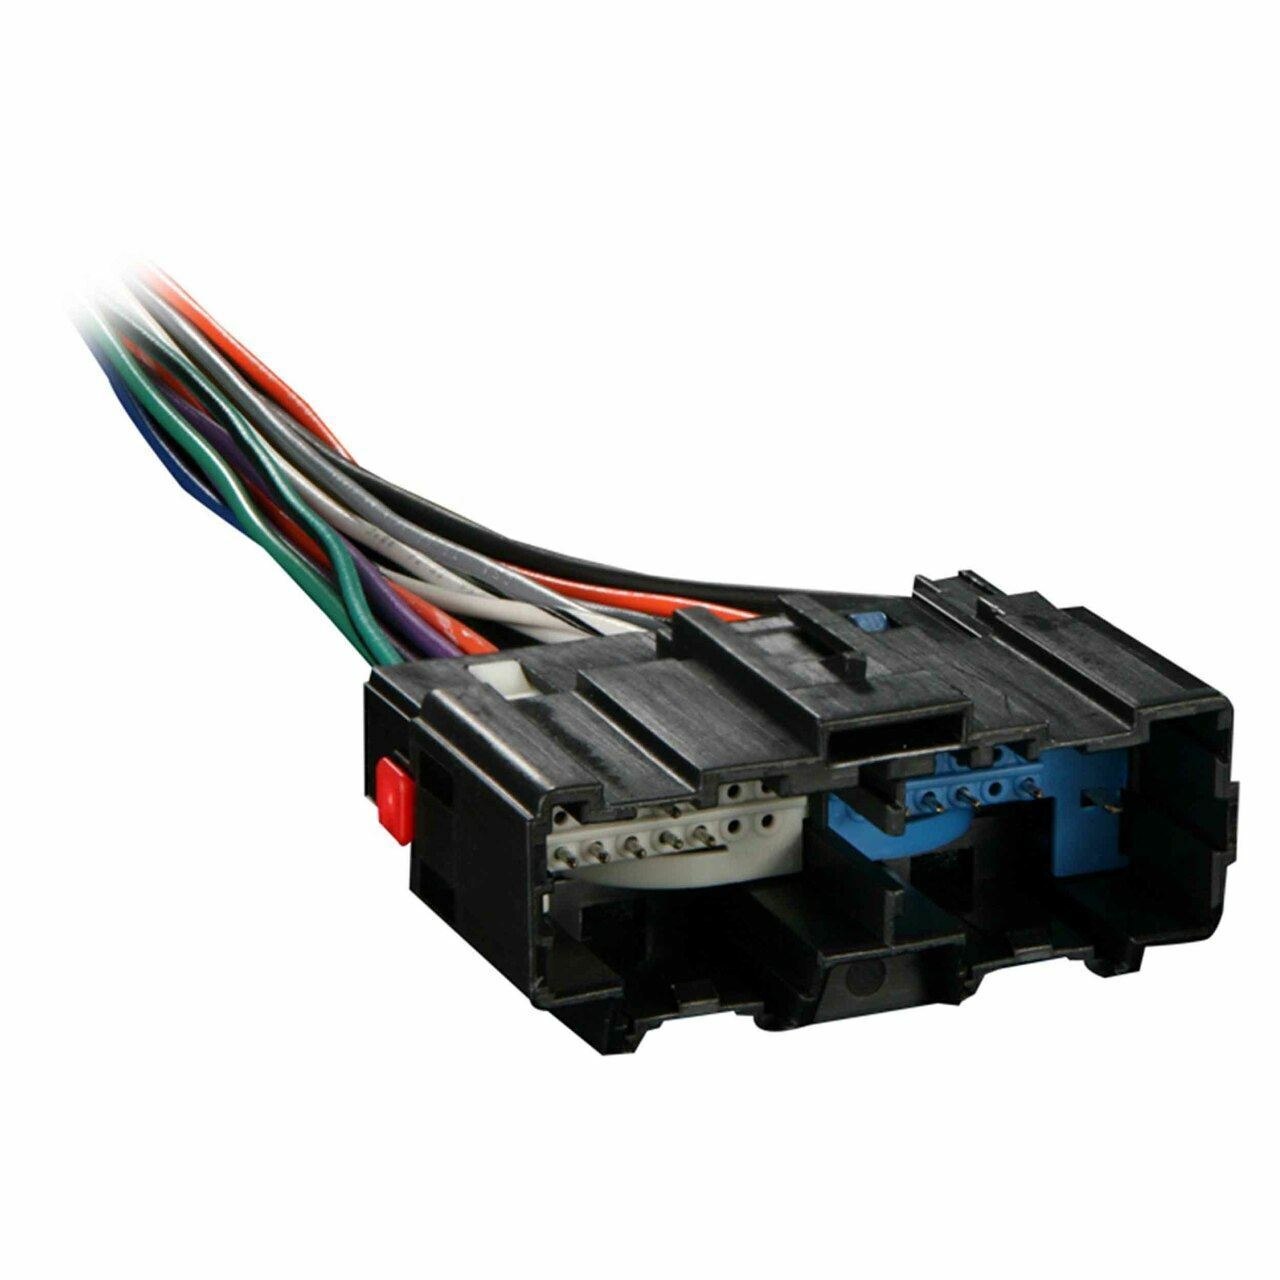 Metra 70-2104 Wire Harness for Aftermarket Stereo Installation